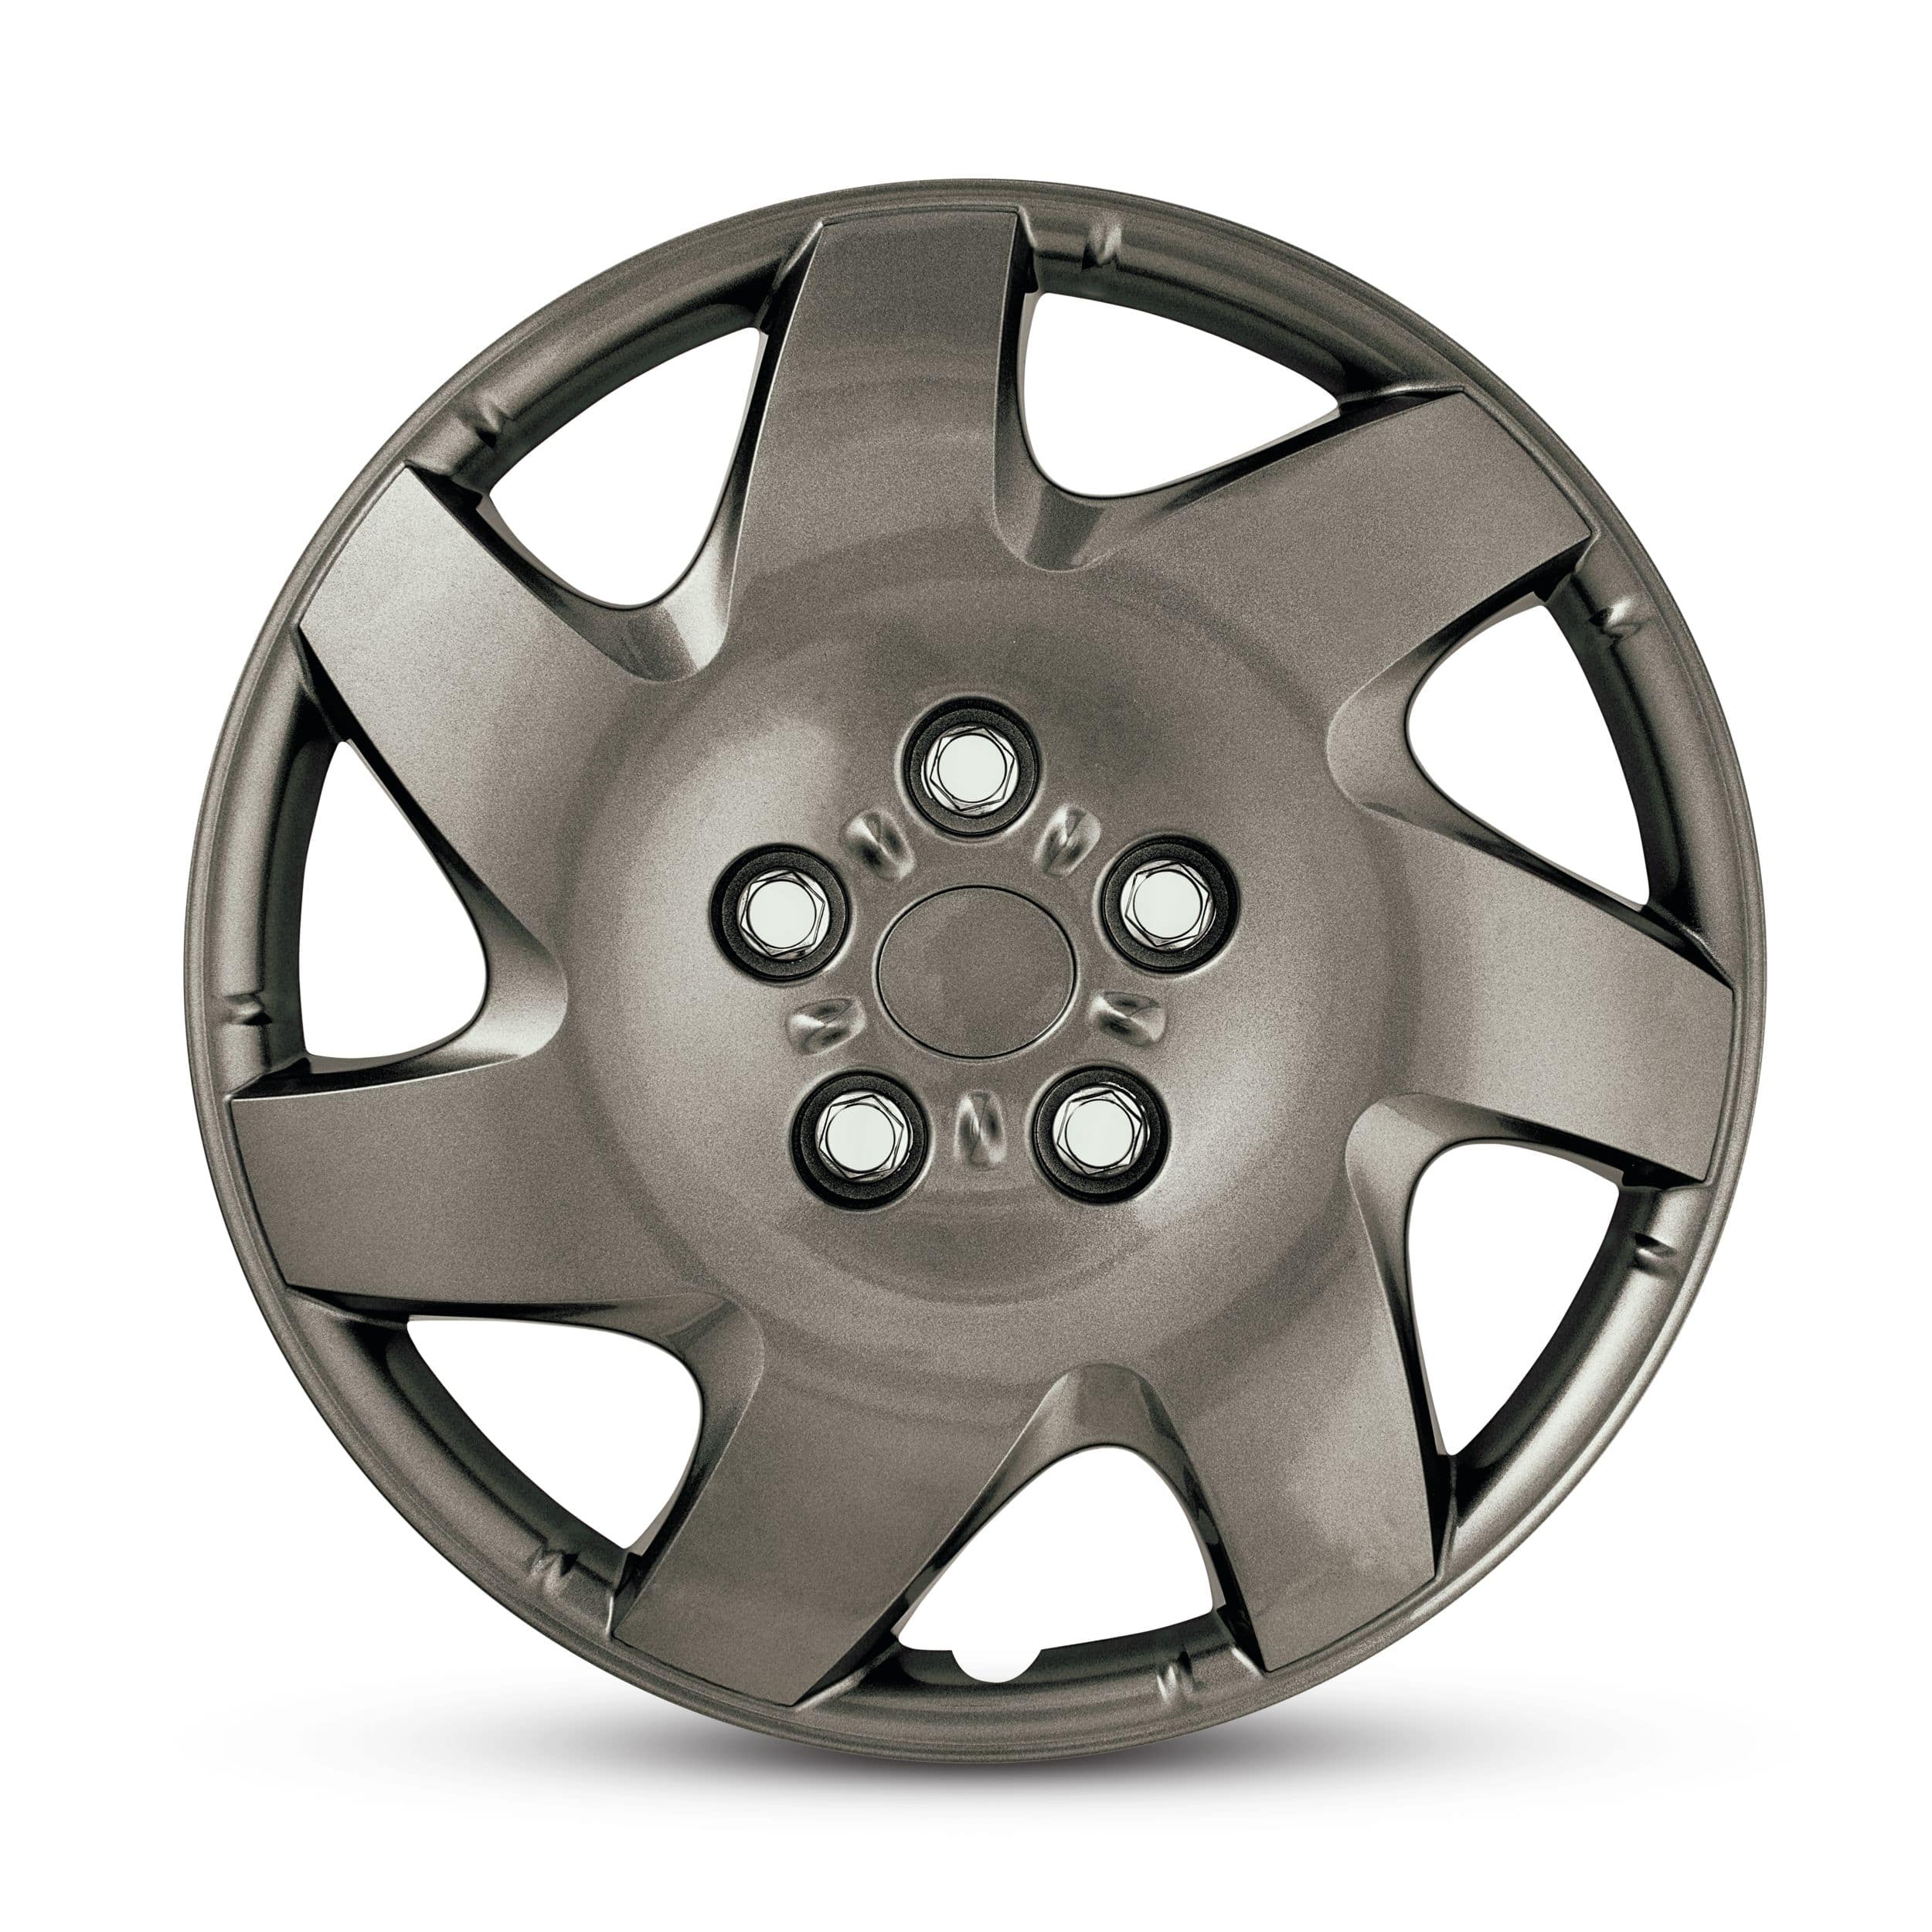 AutoTrends Wheel Cover, Gunmetal 15-in, 4-pk Canadian Tire